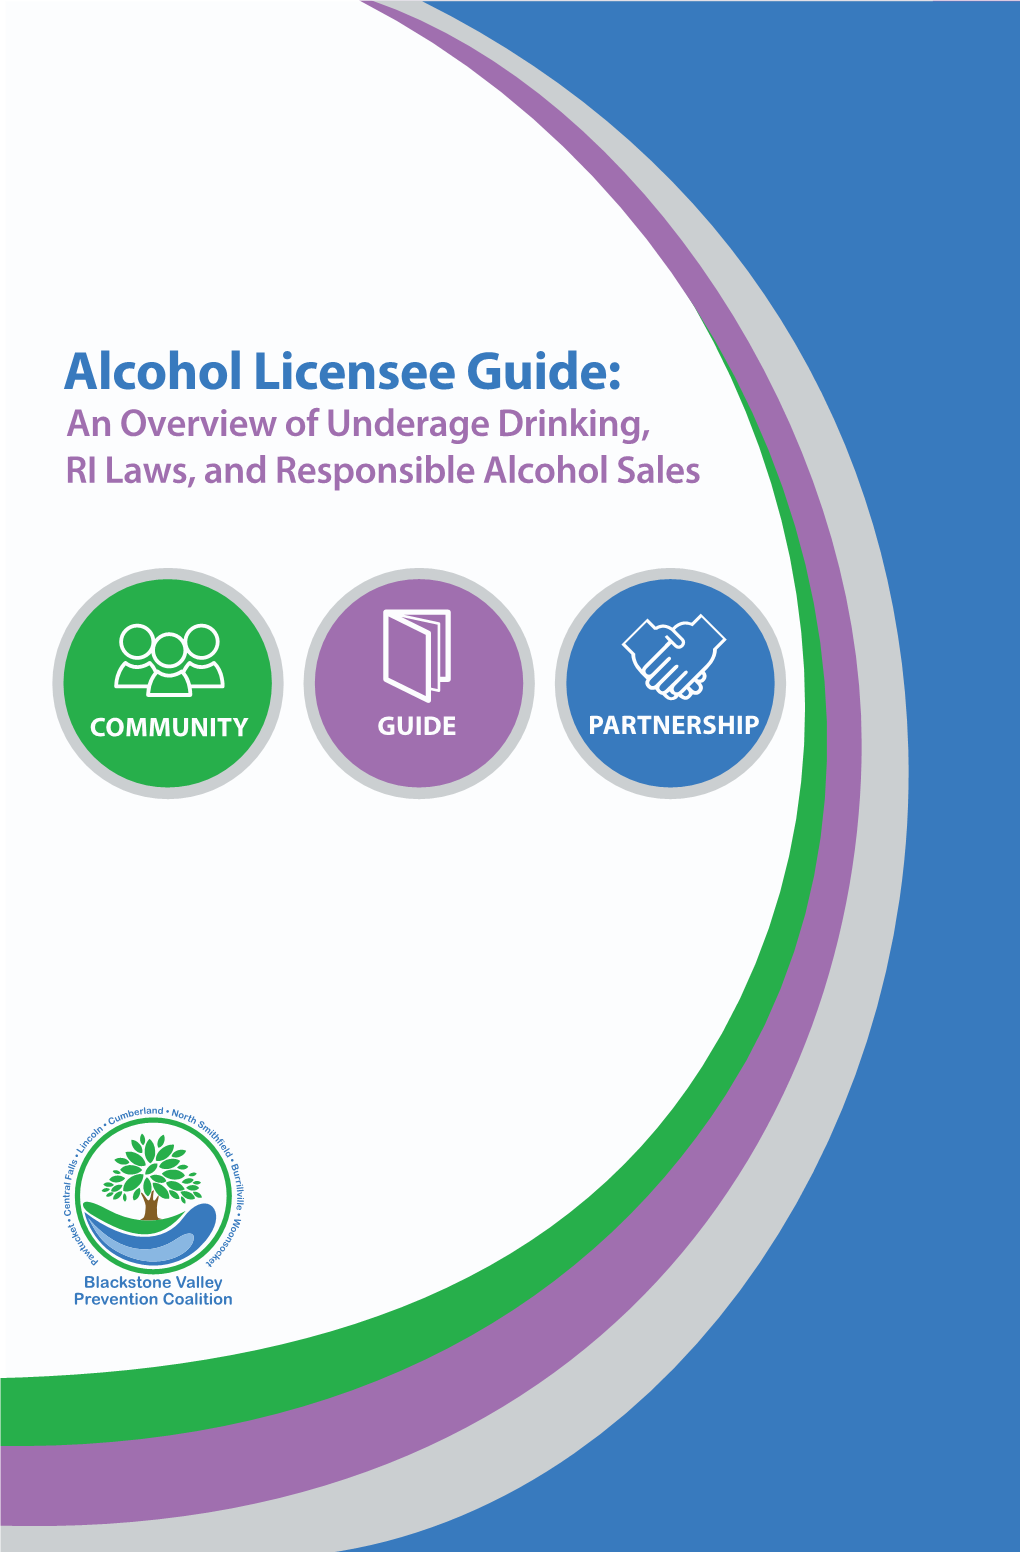 Alcohol Licensee Guide: an Overview of Underage Drinking, RI Laws, and Responsible Alcohol Sales